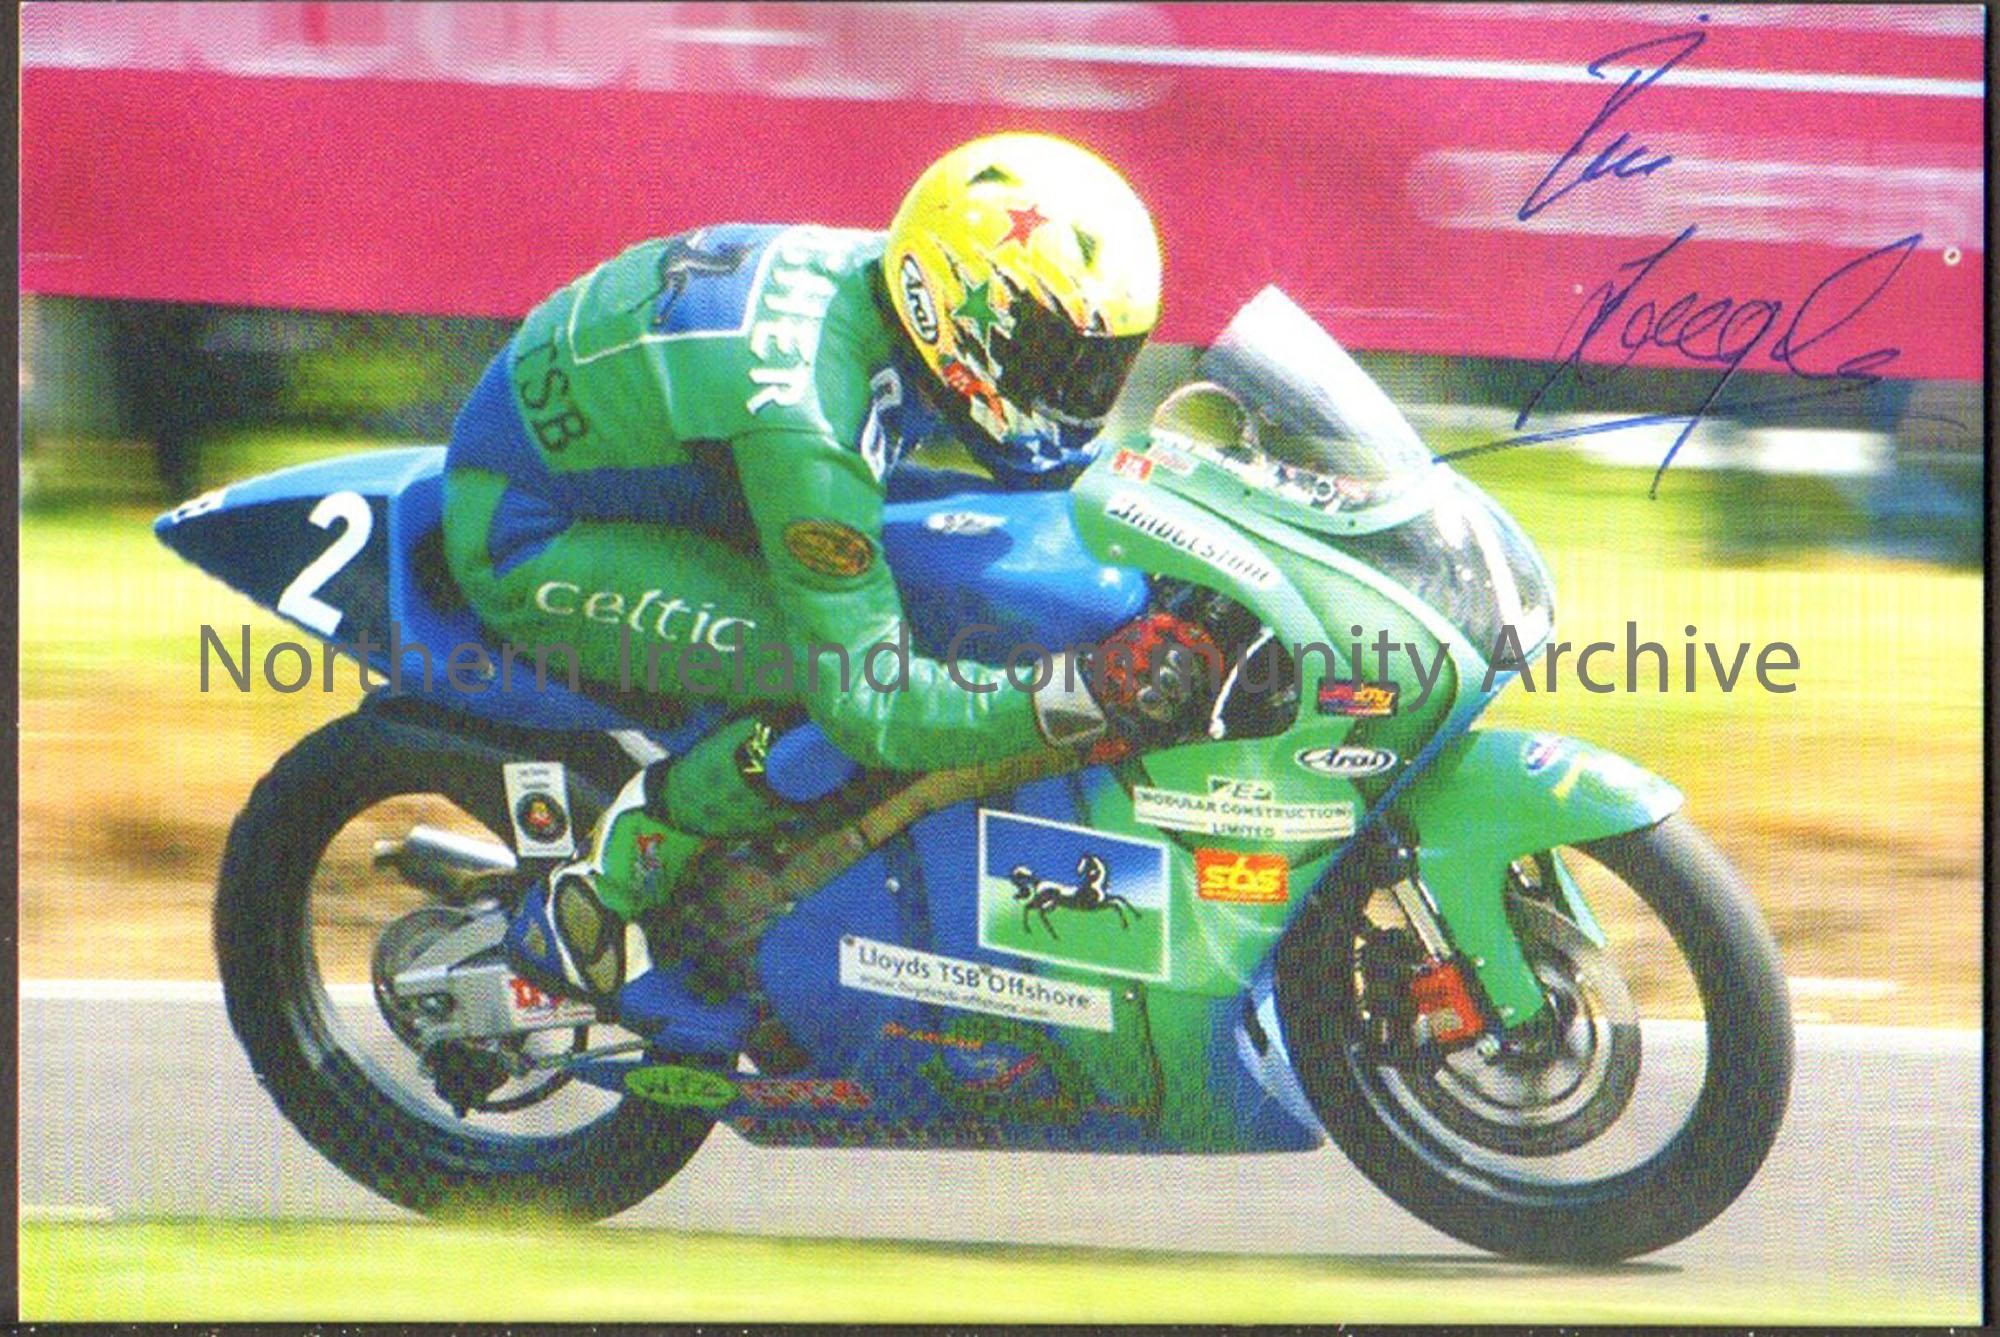 Signed photograph of Ian Lougher riding a green and blue motorbike with number 2 on the side wearing green and blue leathers and a luminous green helm…